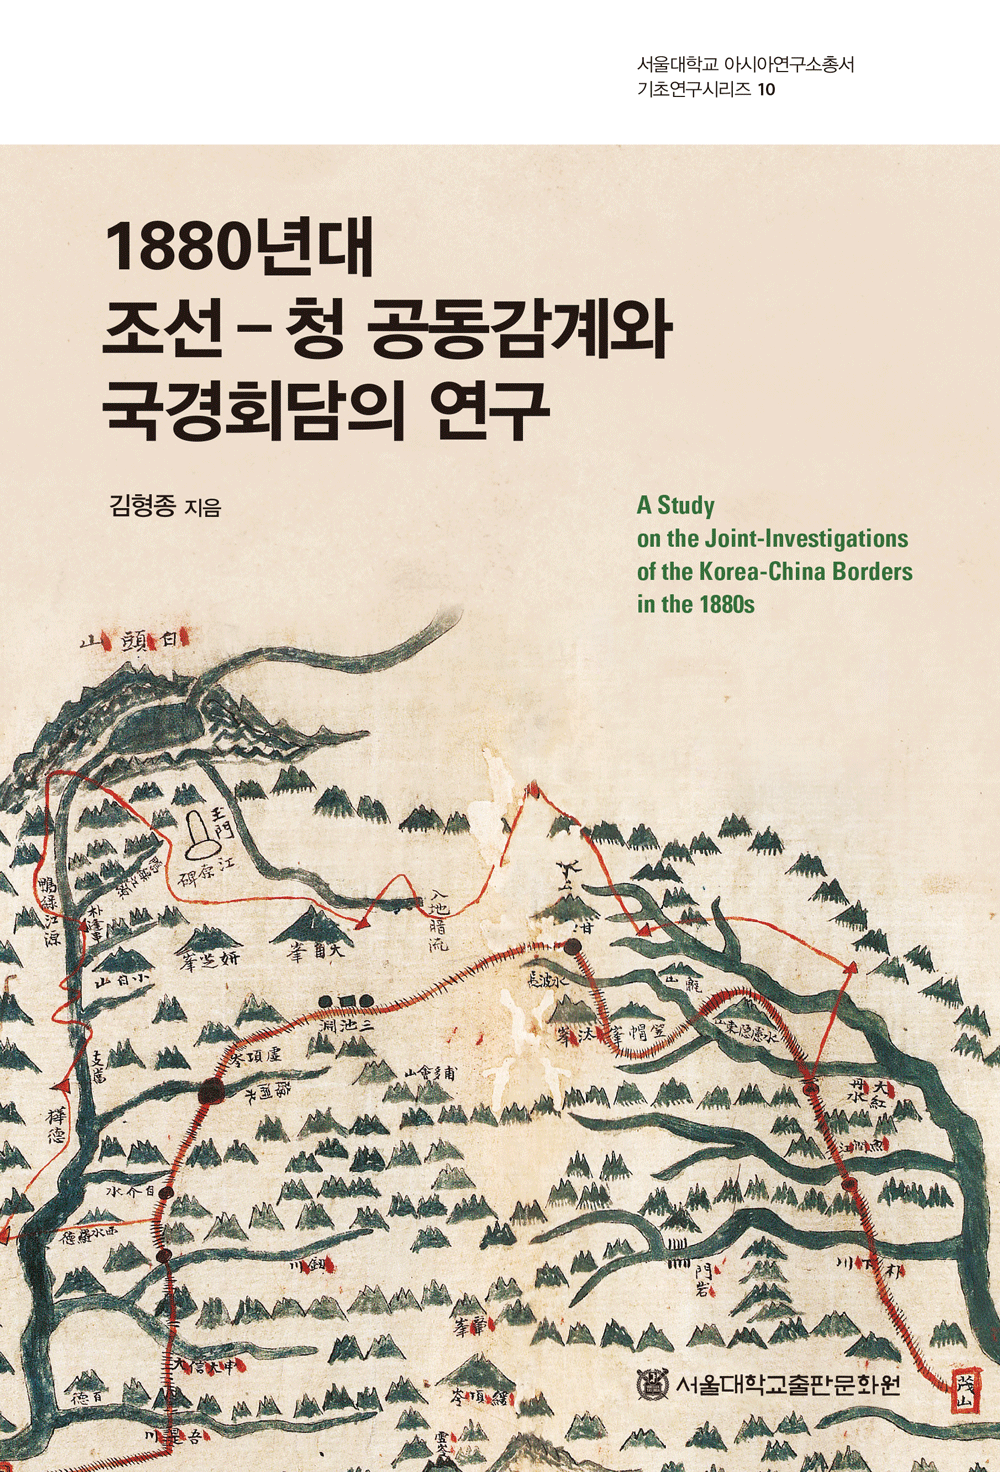 A Study on the Joint-Investigations of the Korea-China Borders in the 1880s